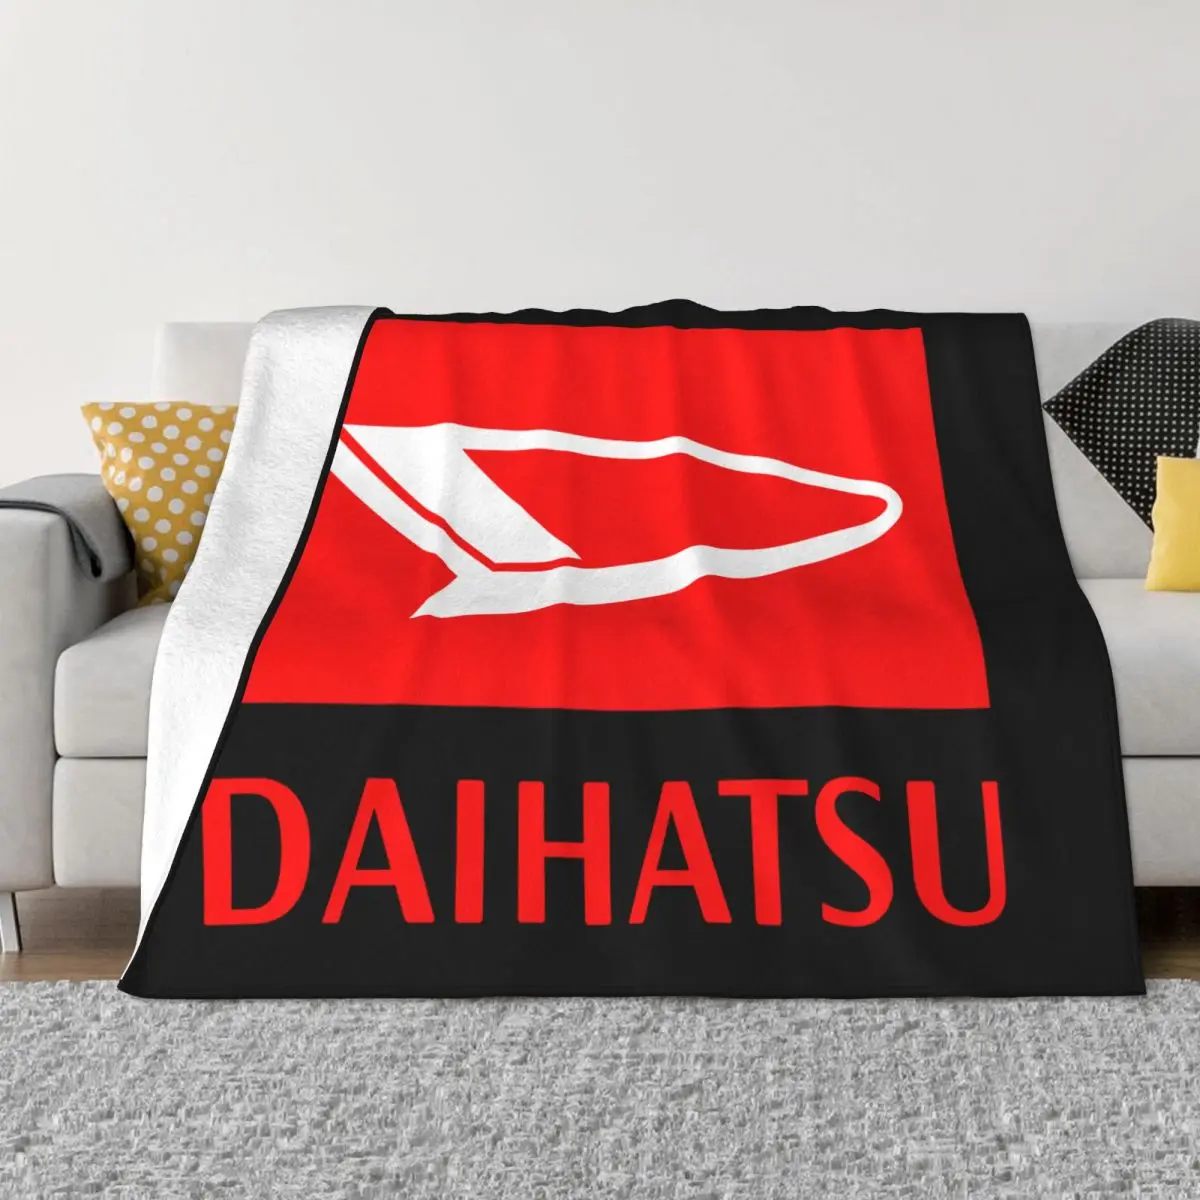 

DAIHATSU Blankets and Throws Super Soft Thermal Indoor Outdoor Blanket for Living Room Bedroom Office Travel